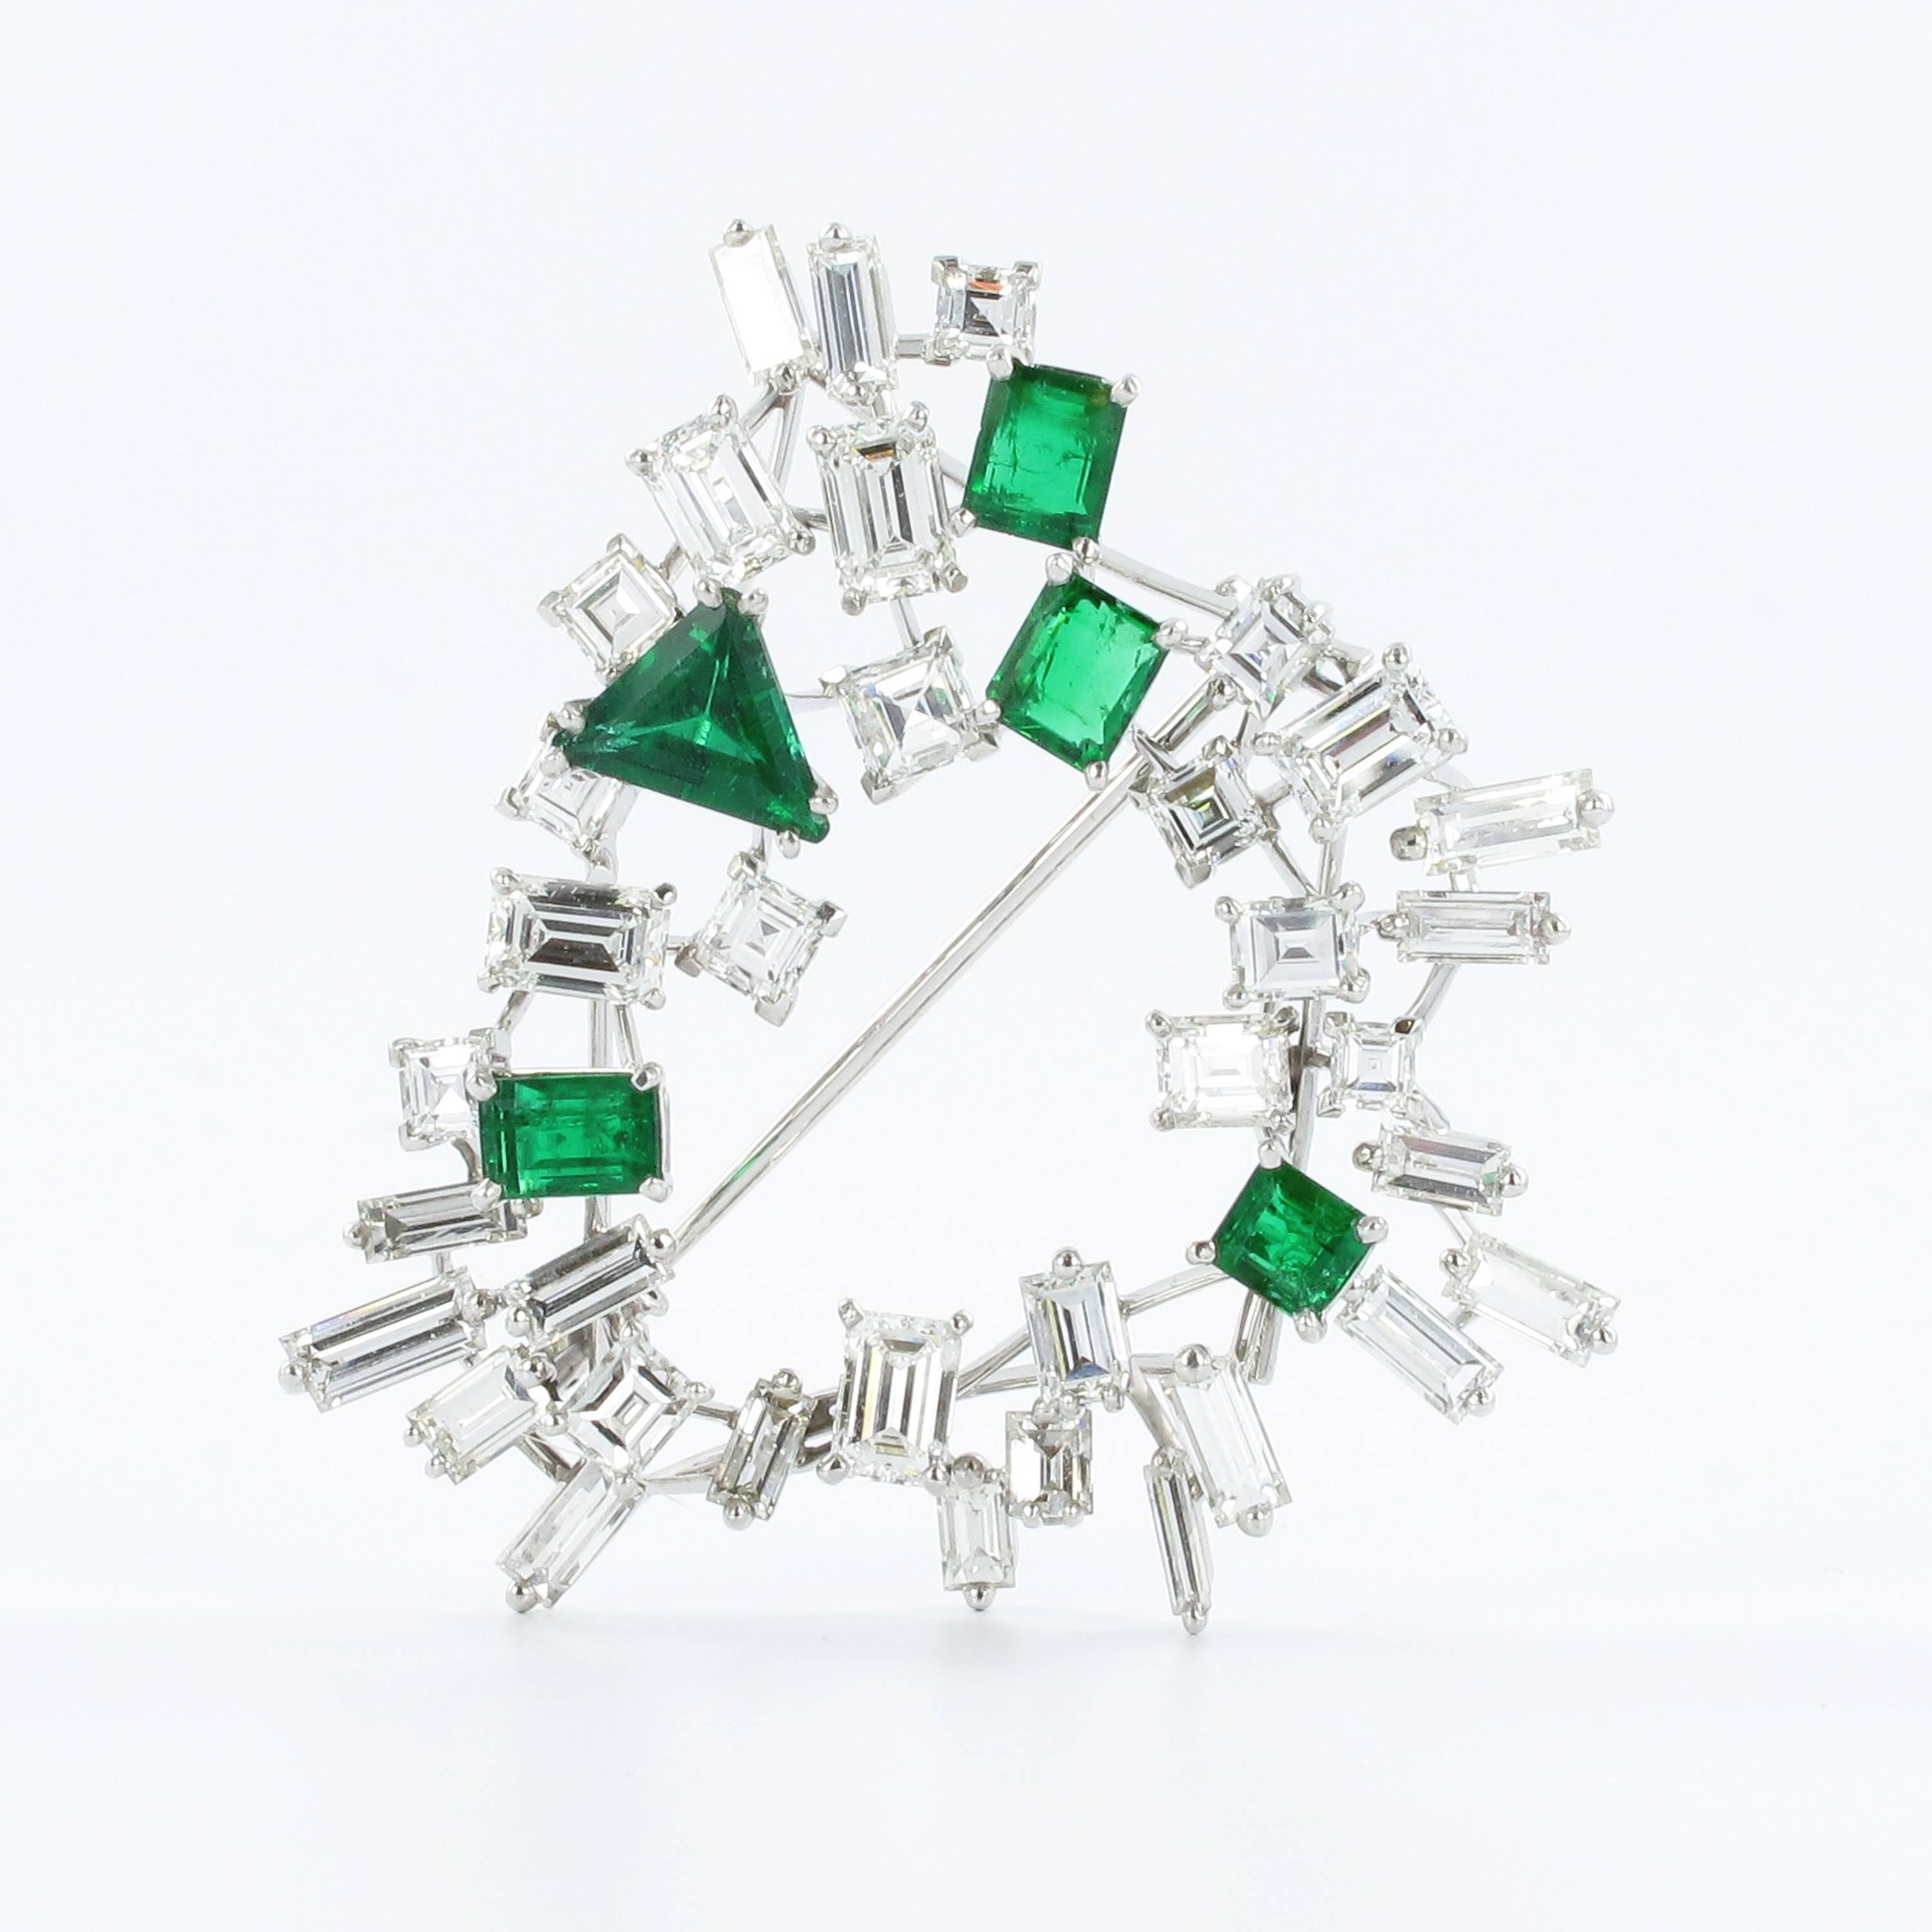 Beautiful brooch in white gold 750. Prong set with 35 square, baguette and emerald cut diamonds of F/G colour and vs clarity, total weight approximately 8.00 carats. Accentuated by 5 emeralds, total weight approximately 2.60 carats. Approximately 45